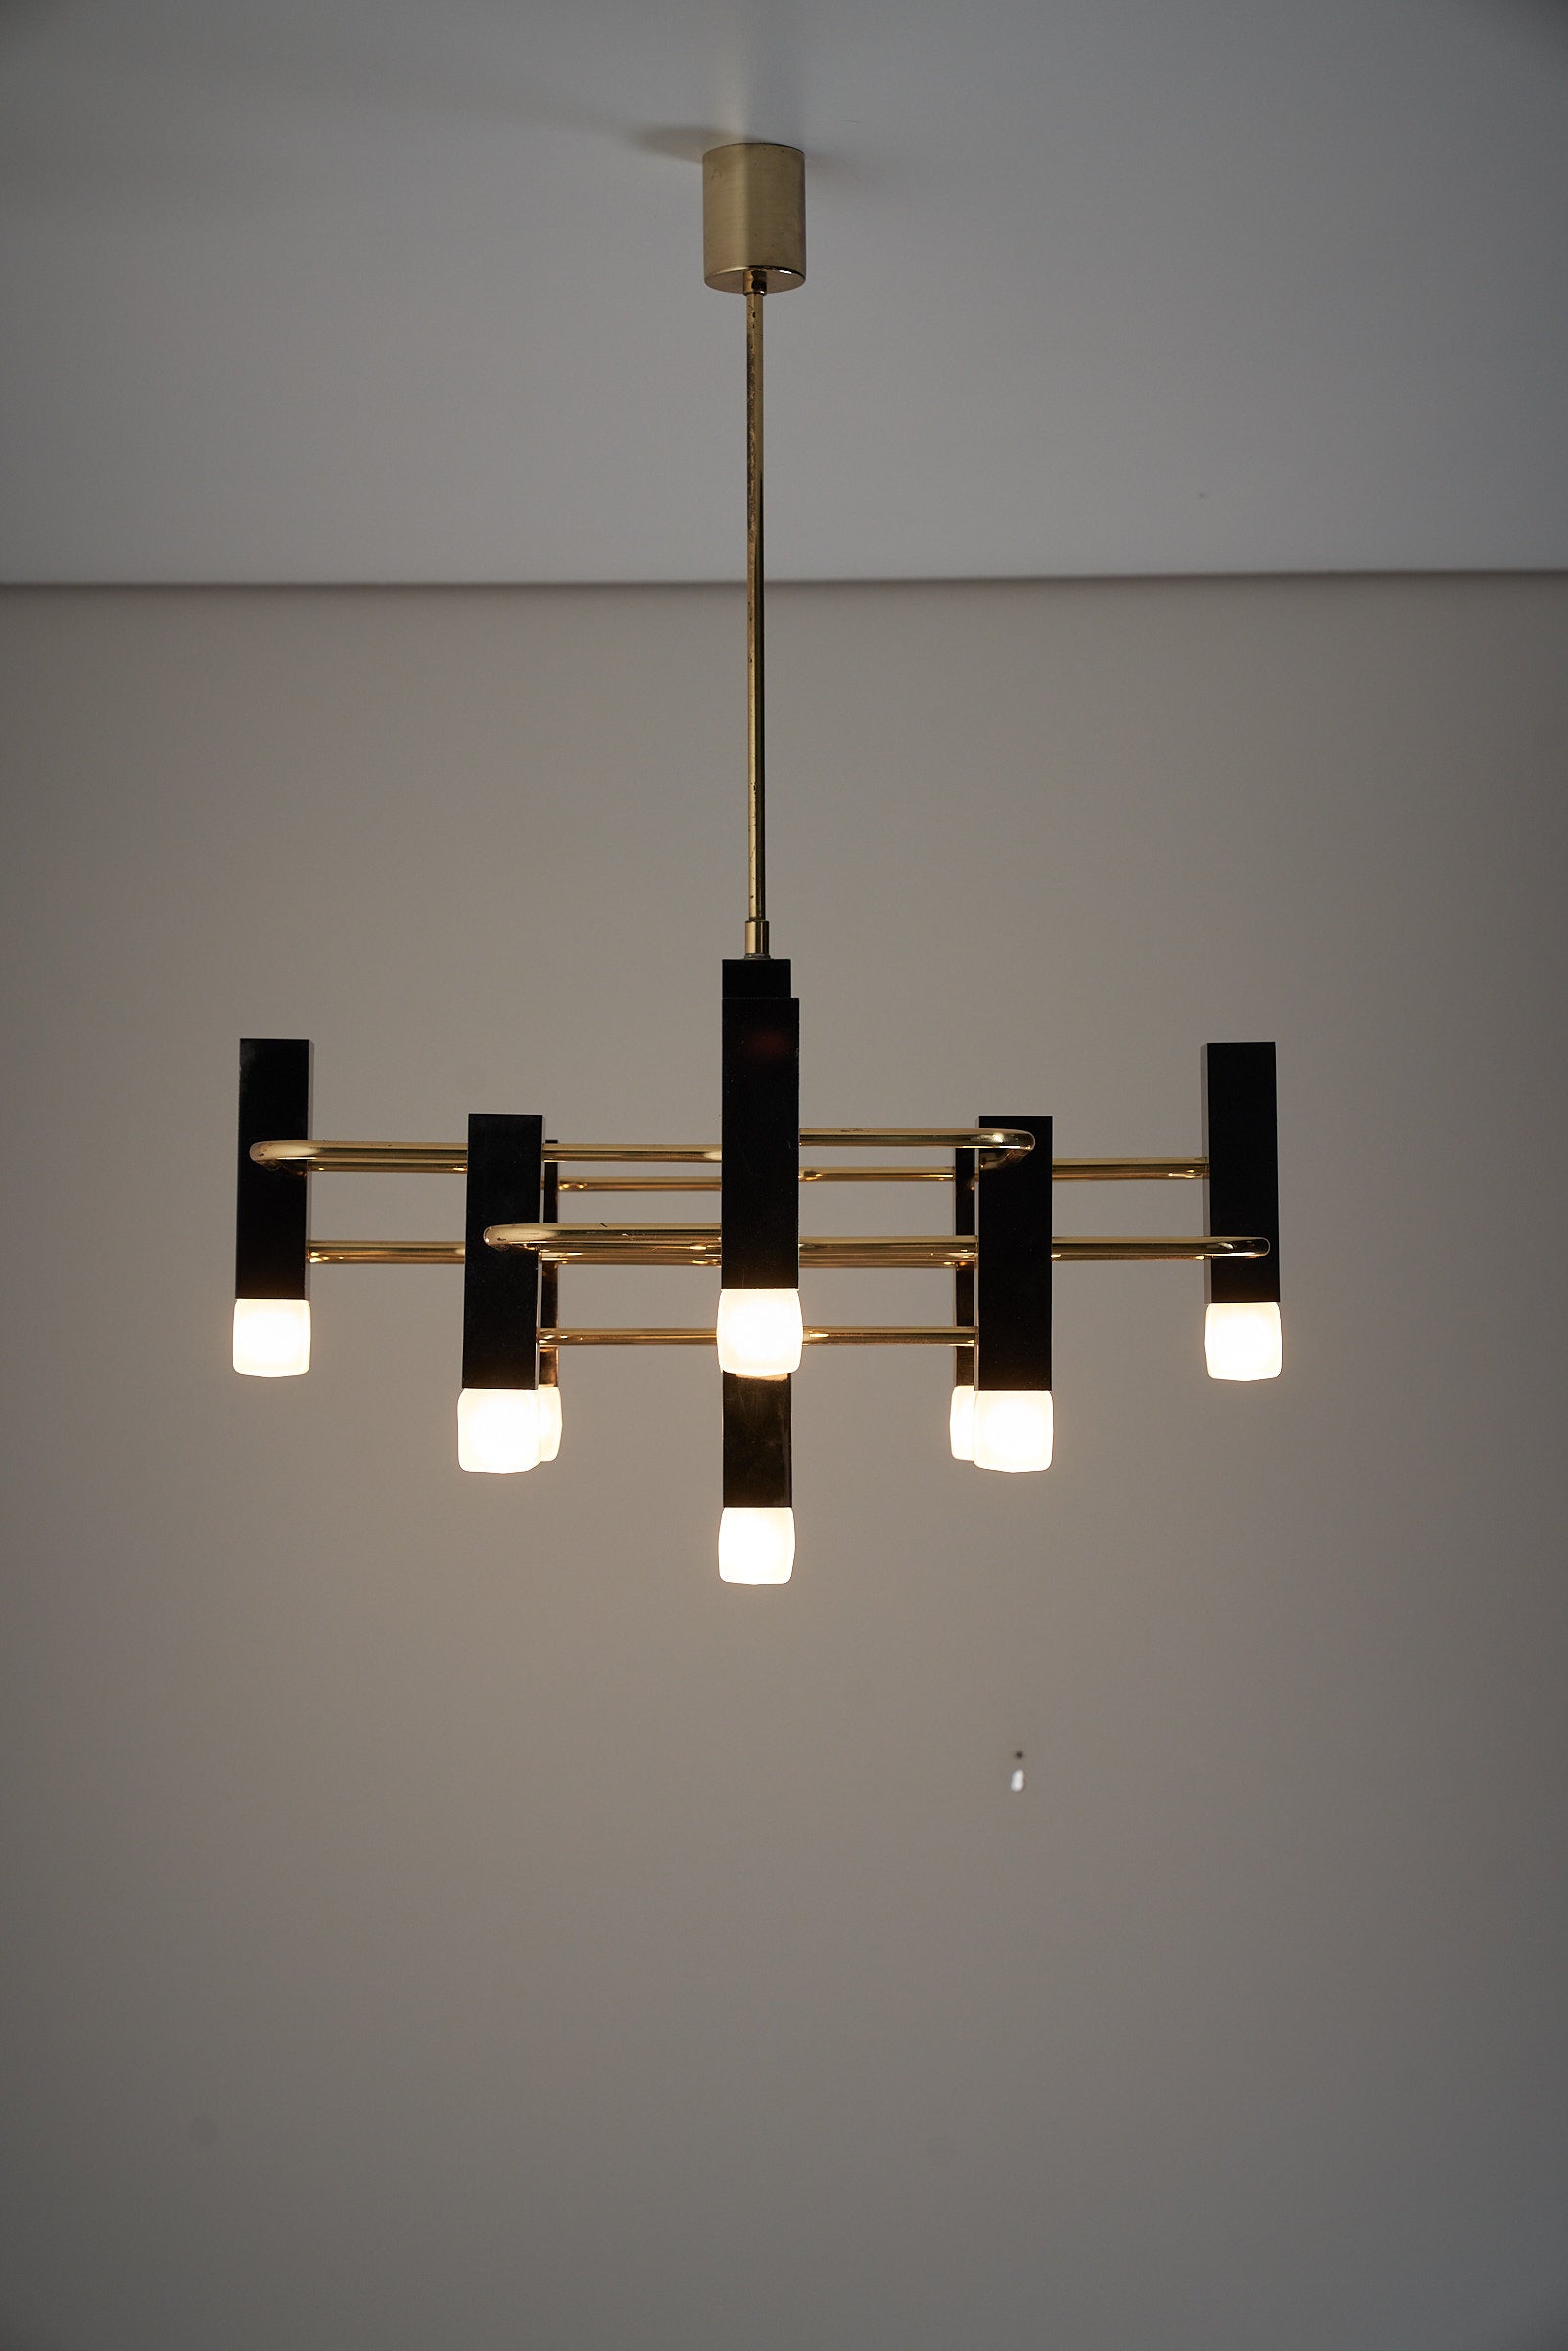 Geometric Chandelier by Sciolari for S.A. Boulanger from Belgium